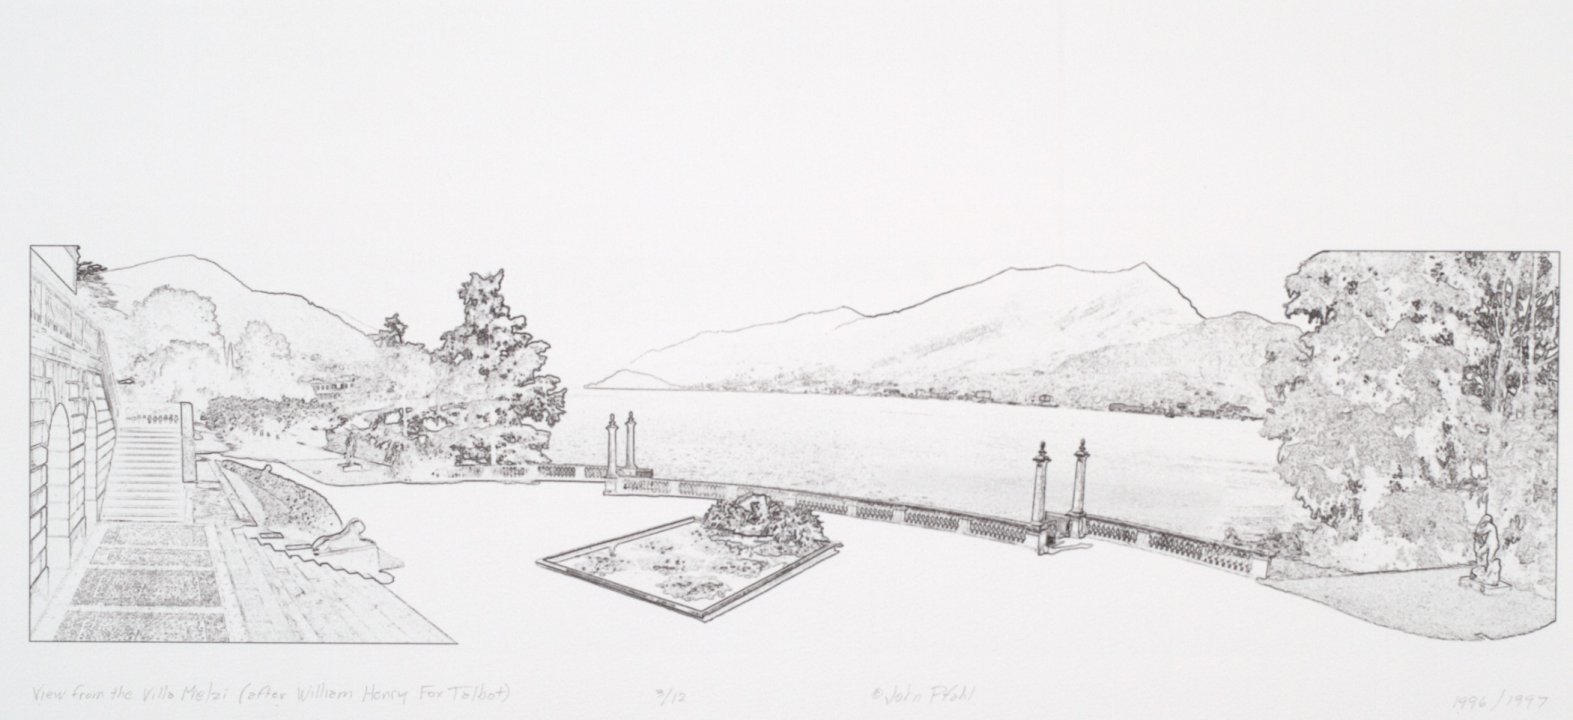 View from the Villa Melzi (after William Henry Fox Talbot) from the portfolio Permutations on the Picturesque